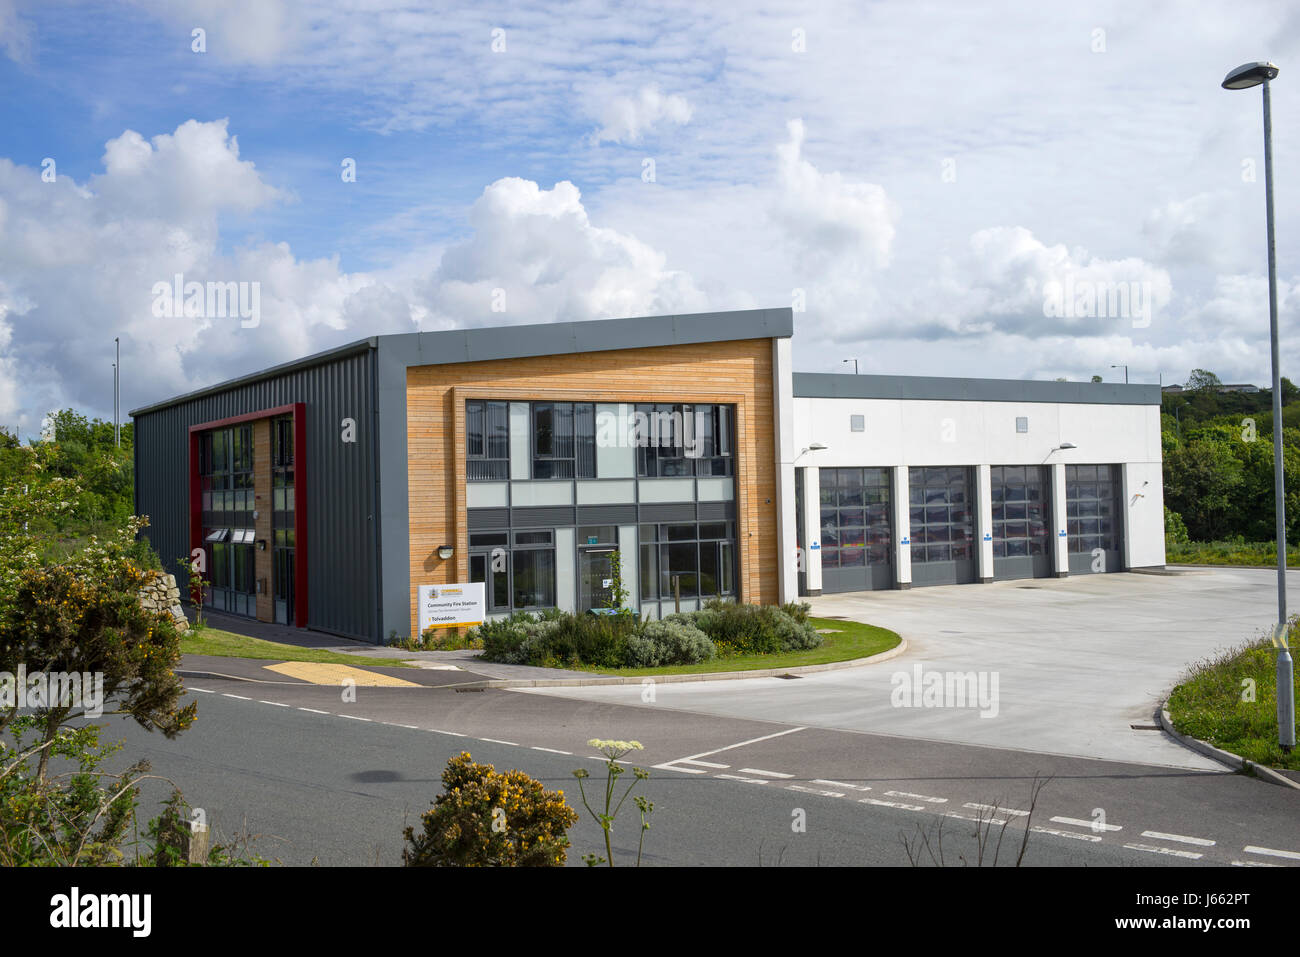 New Tolvaddon Community Fire Station, Camborne Cornwall England UK.  This recently built fire station serves Camborne,  Pool, Redruth and Hayle (CPRH) Stock Photo